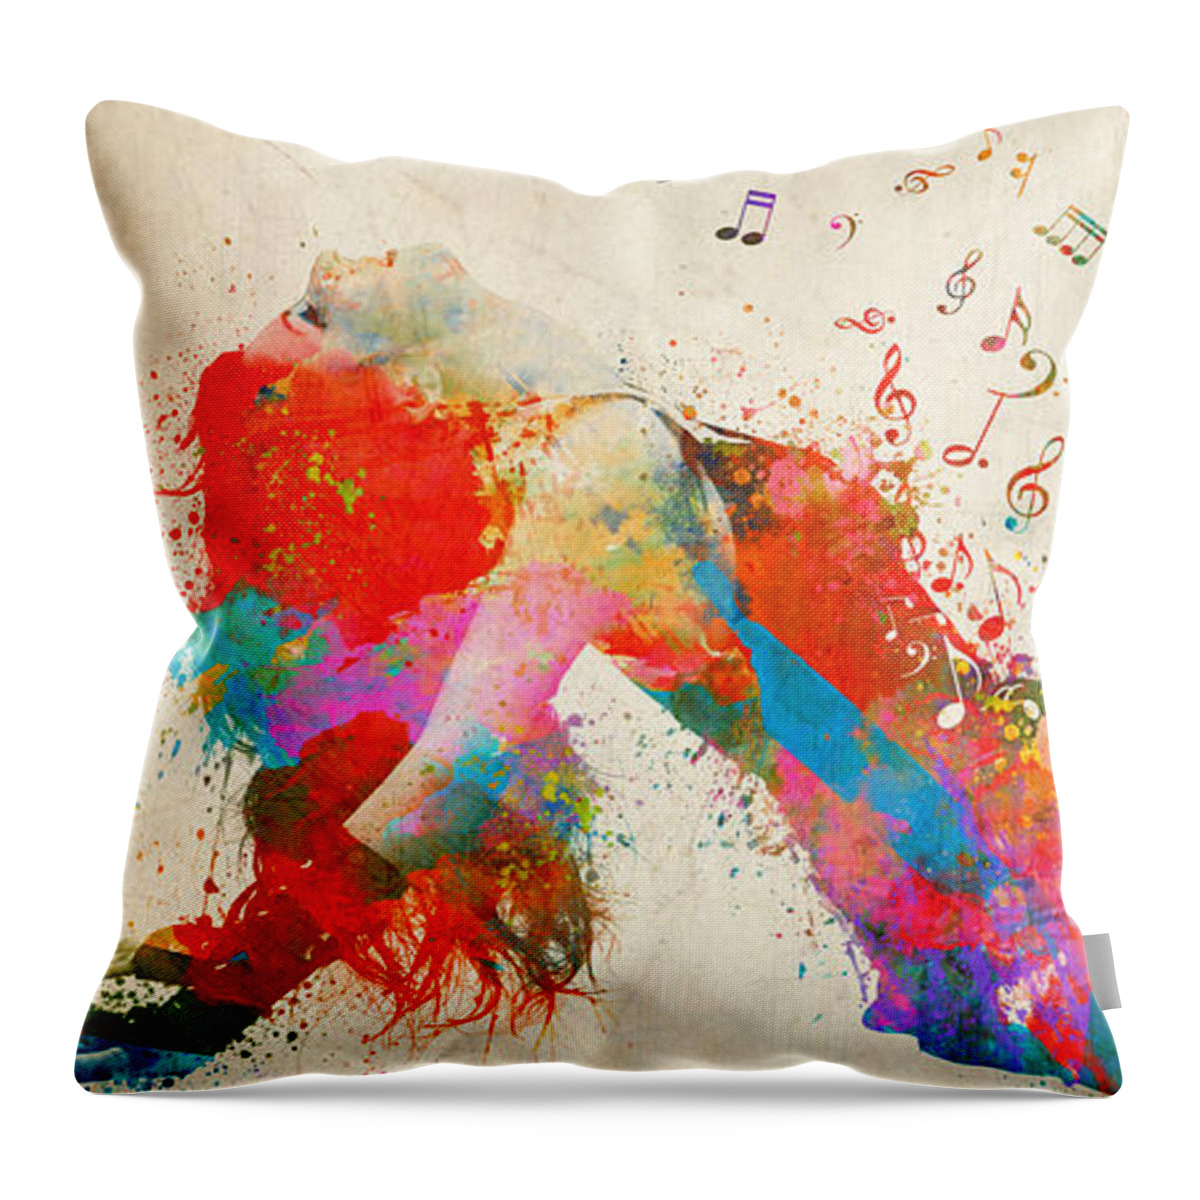 Song Throw Pillow featuring the digital art Sweet Jenny Bursting with Music Cropped by Nikki Marie Smith